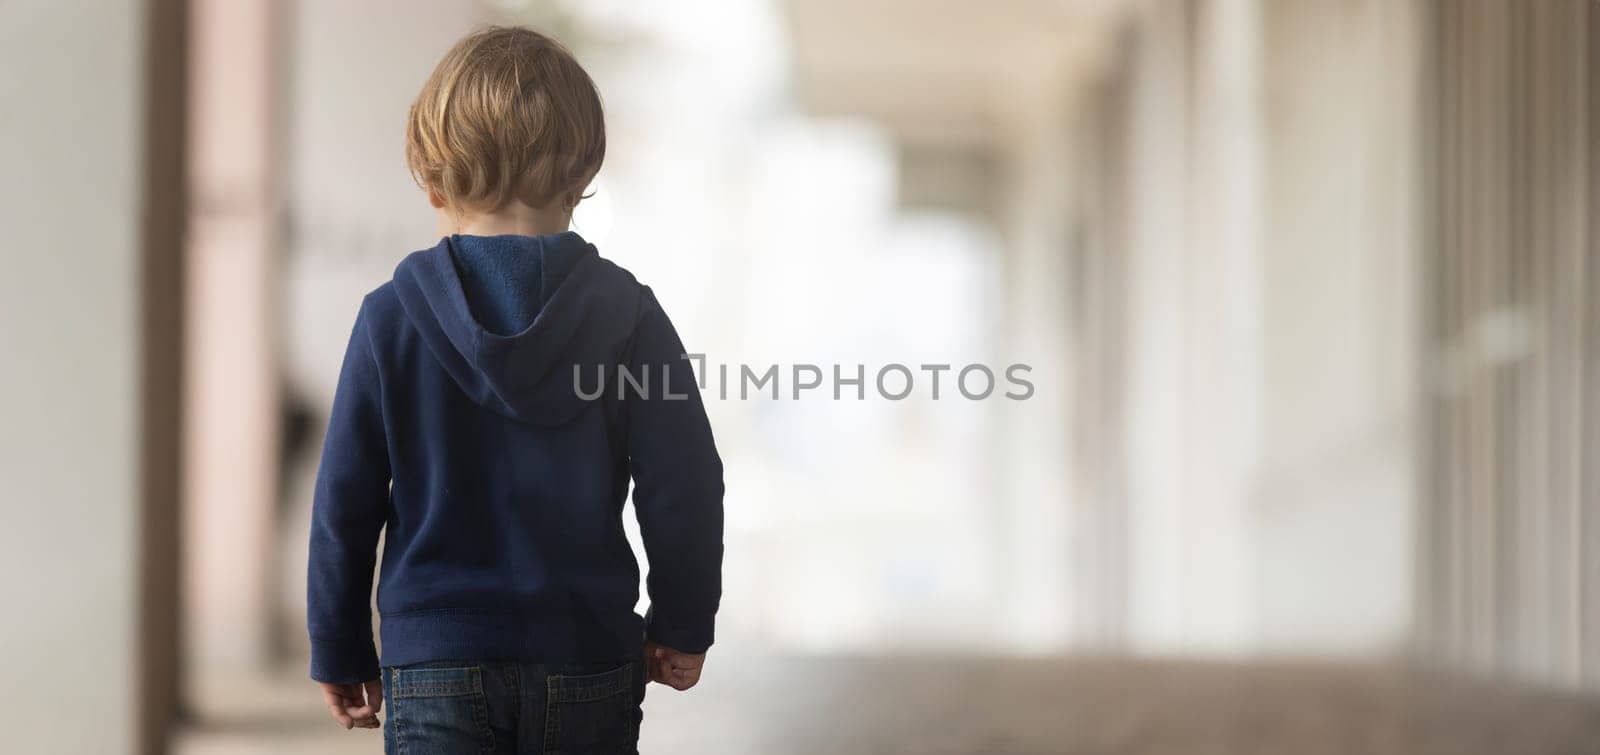 A young boy walking down a hallway in a blue sweater